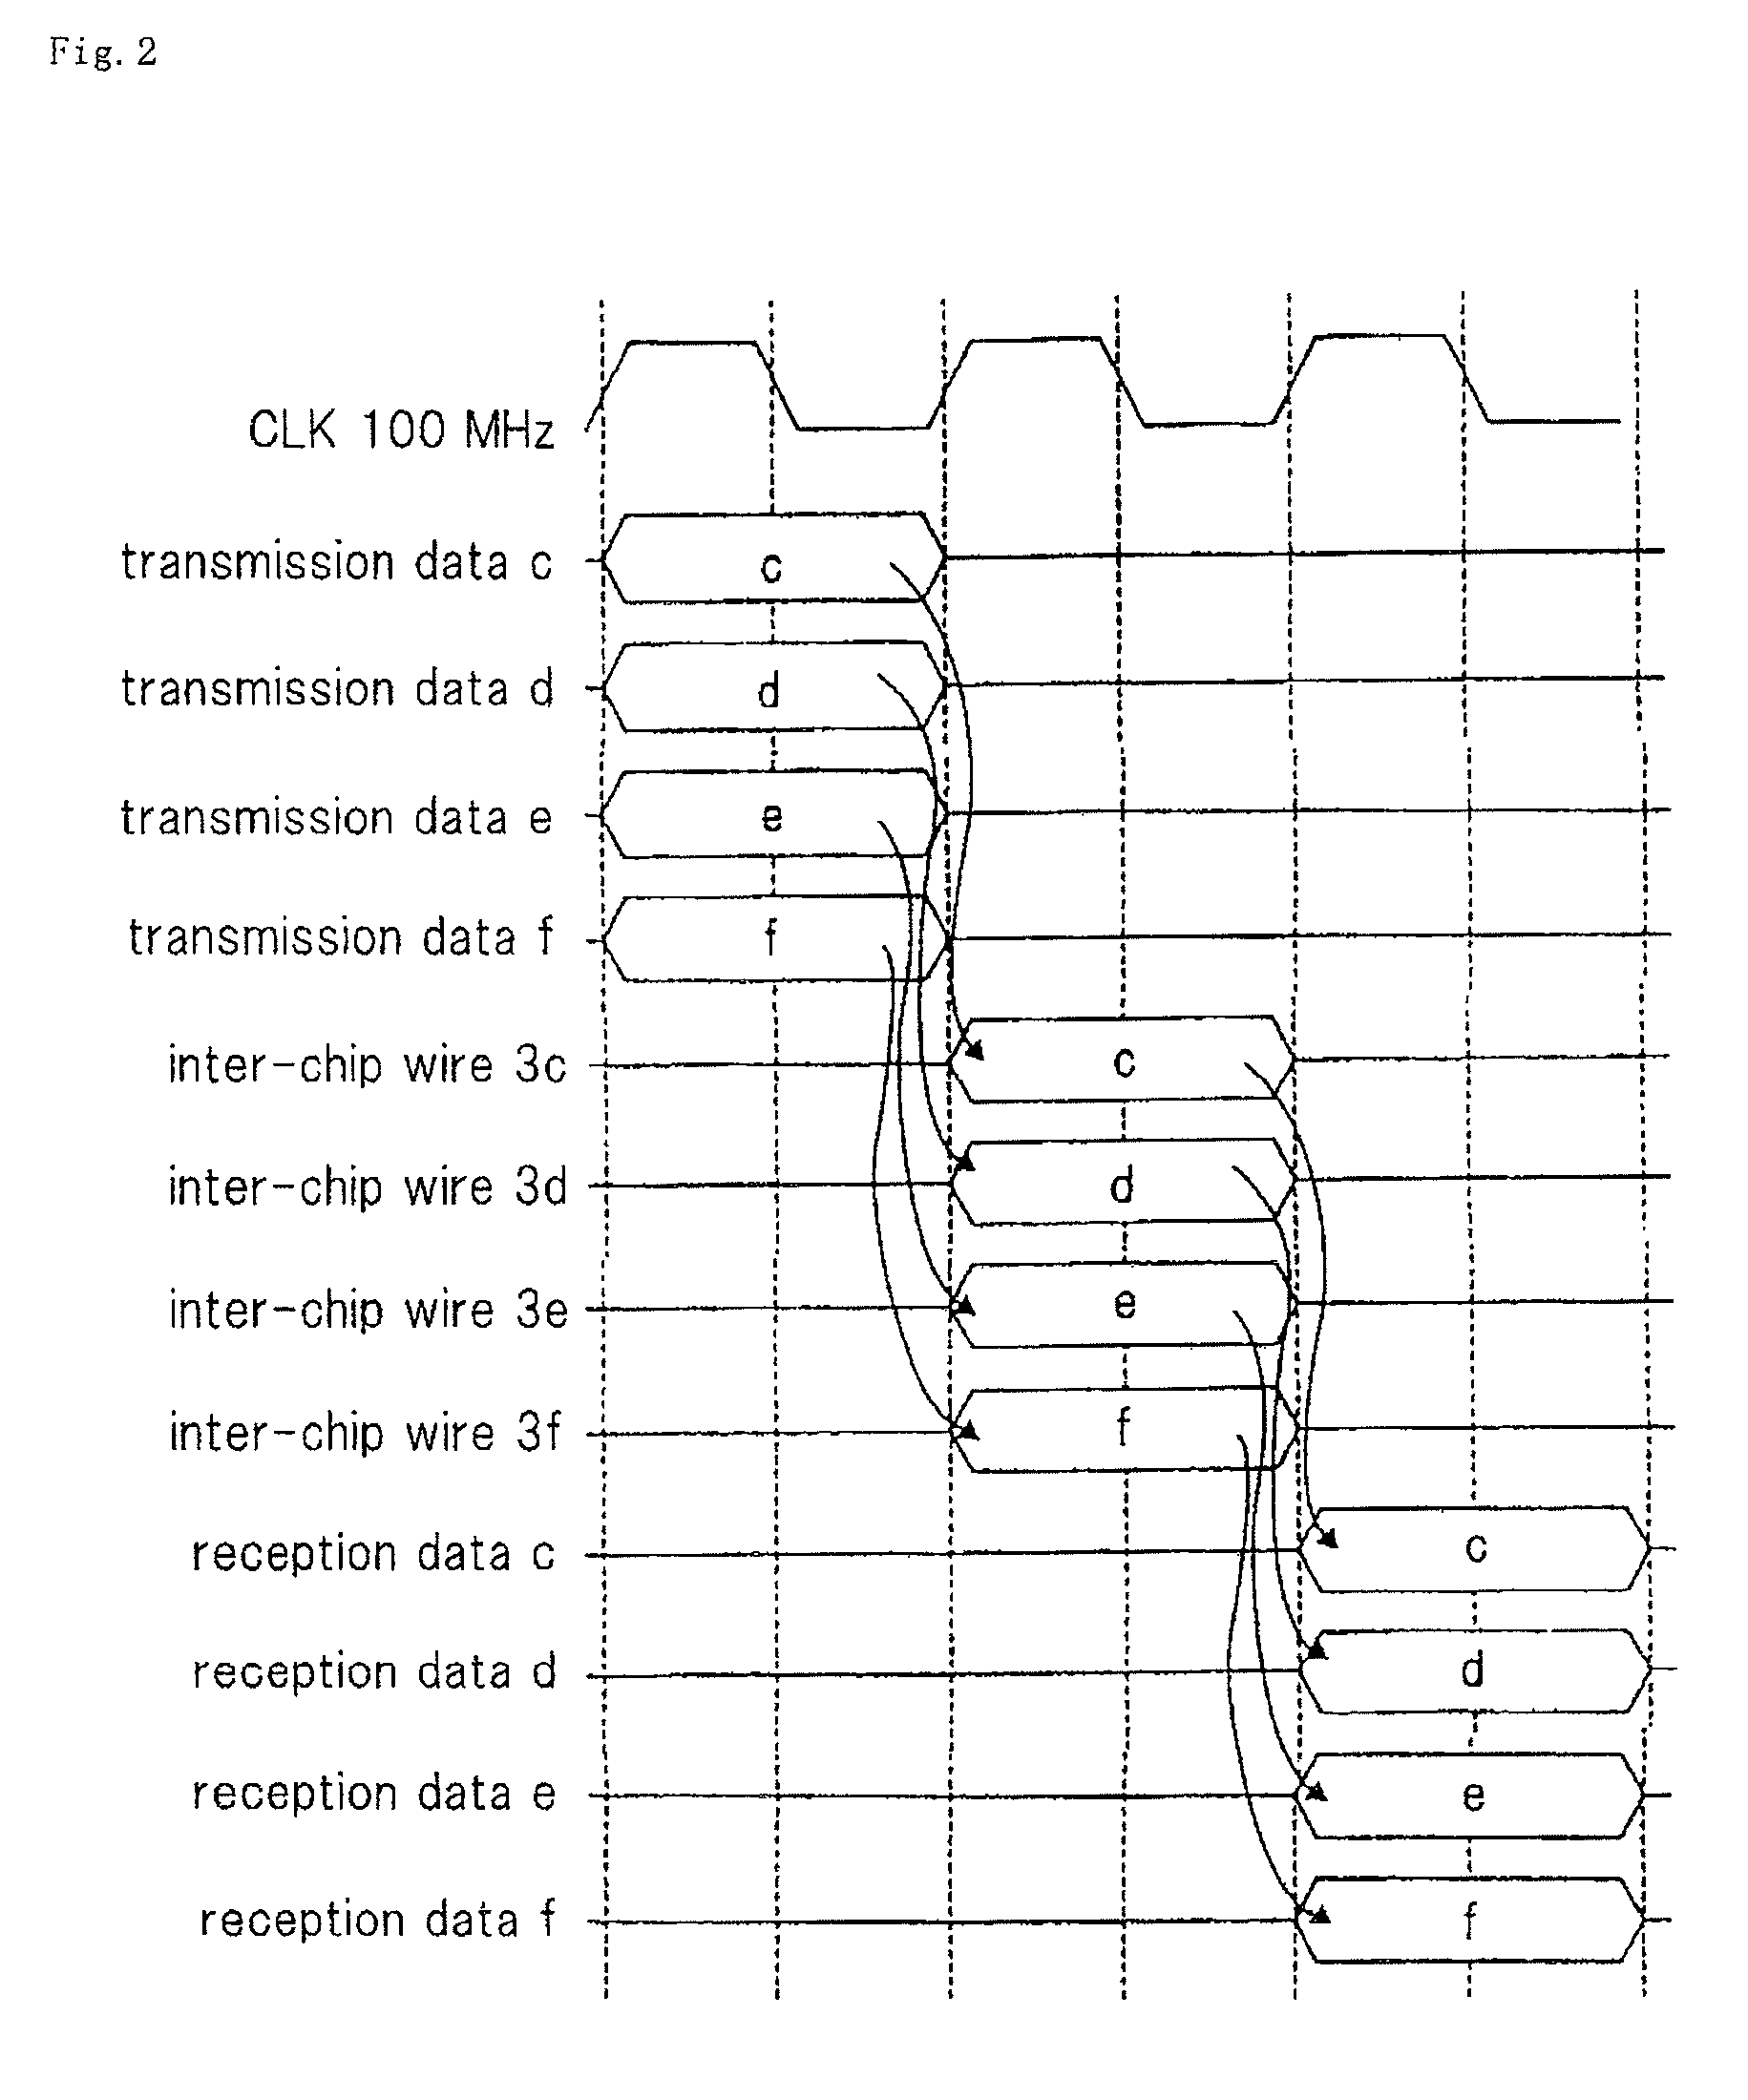 Data transfer between chips in a multi-chip semiconductor device with an increased data transfer speed